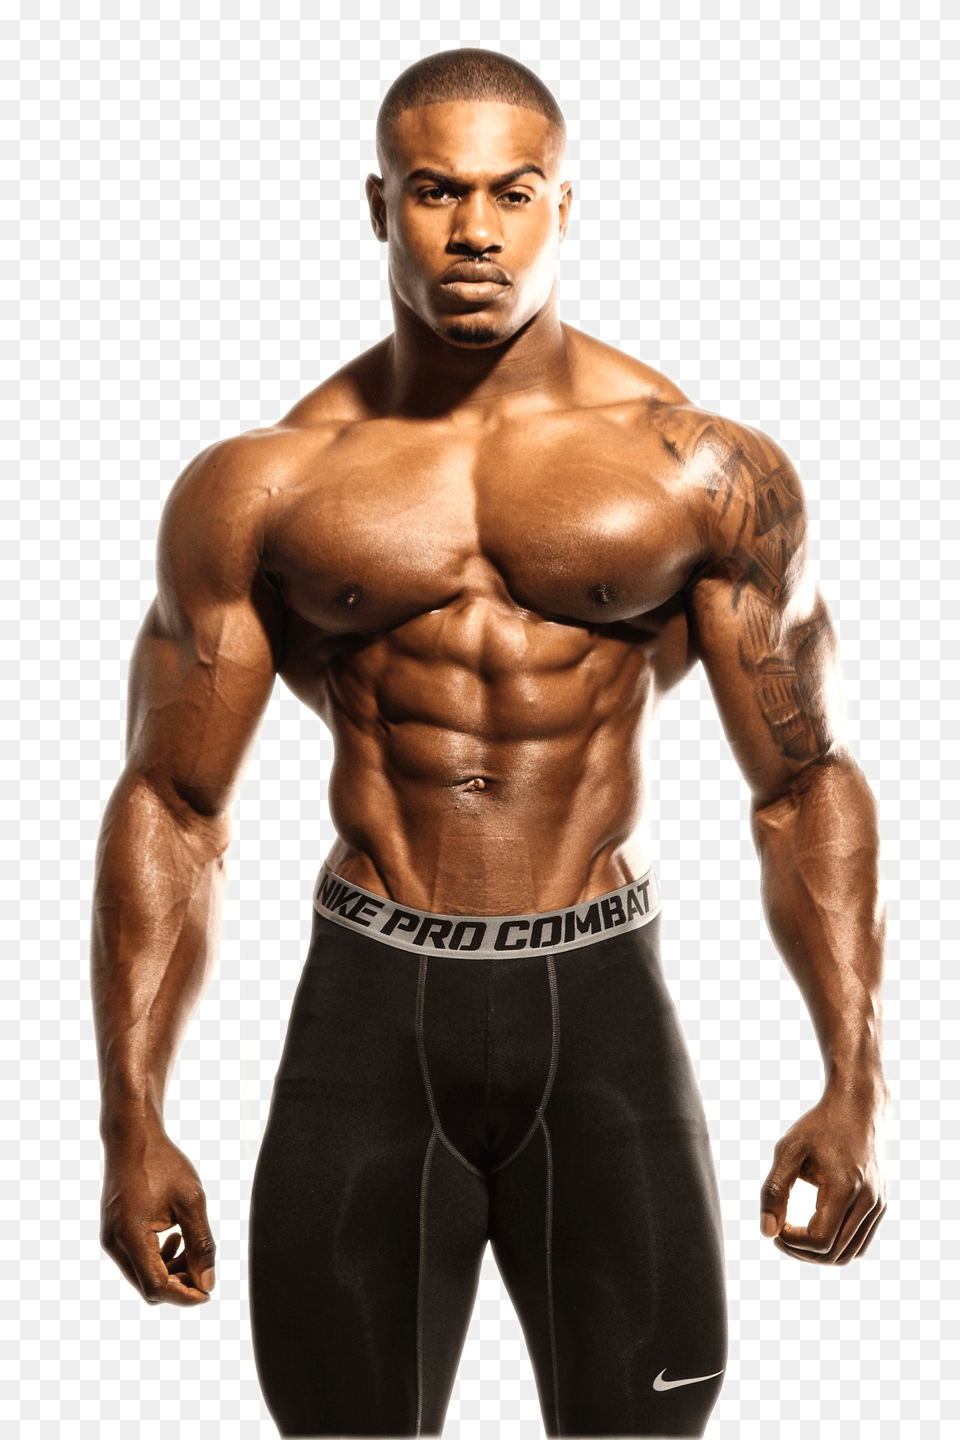 Bodybuilding, Adult, Male, Man, Person Png